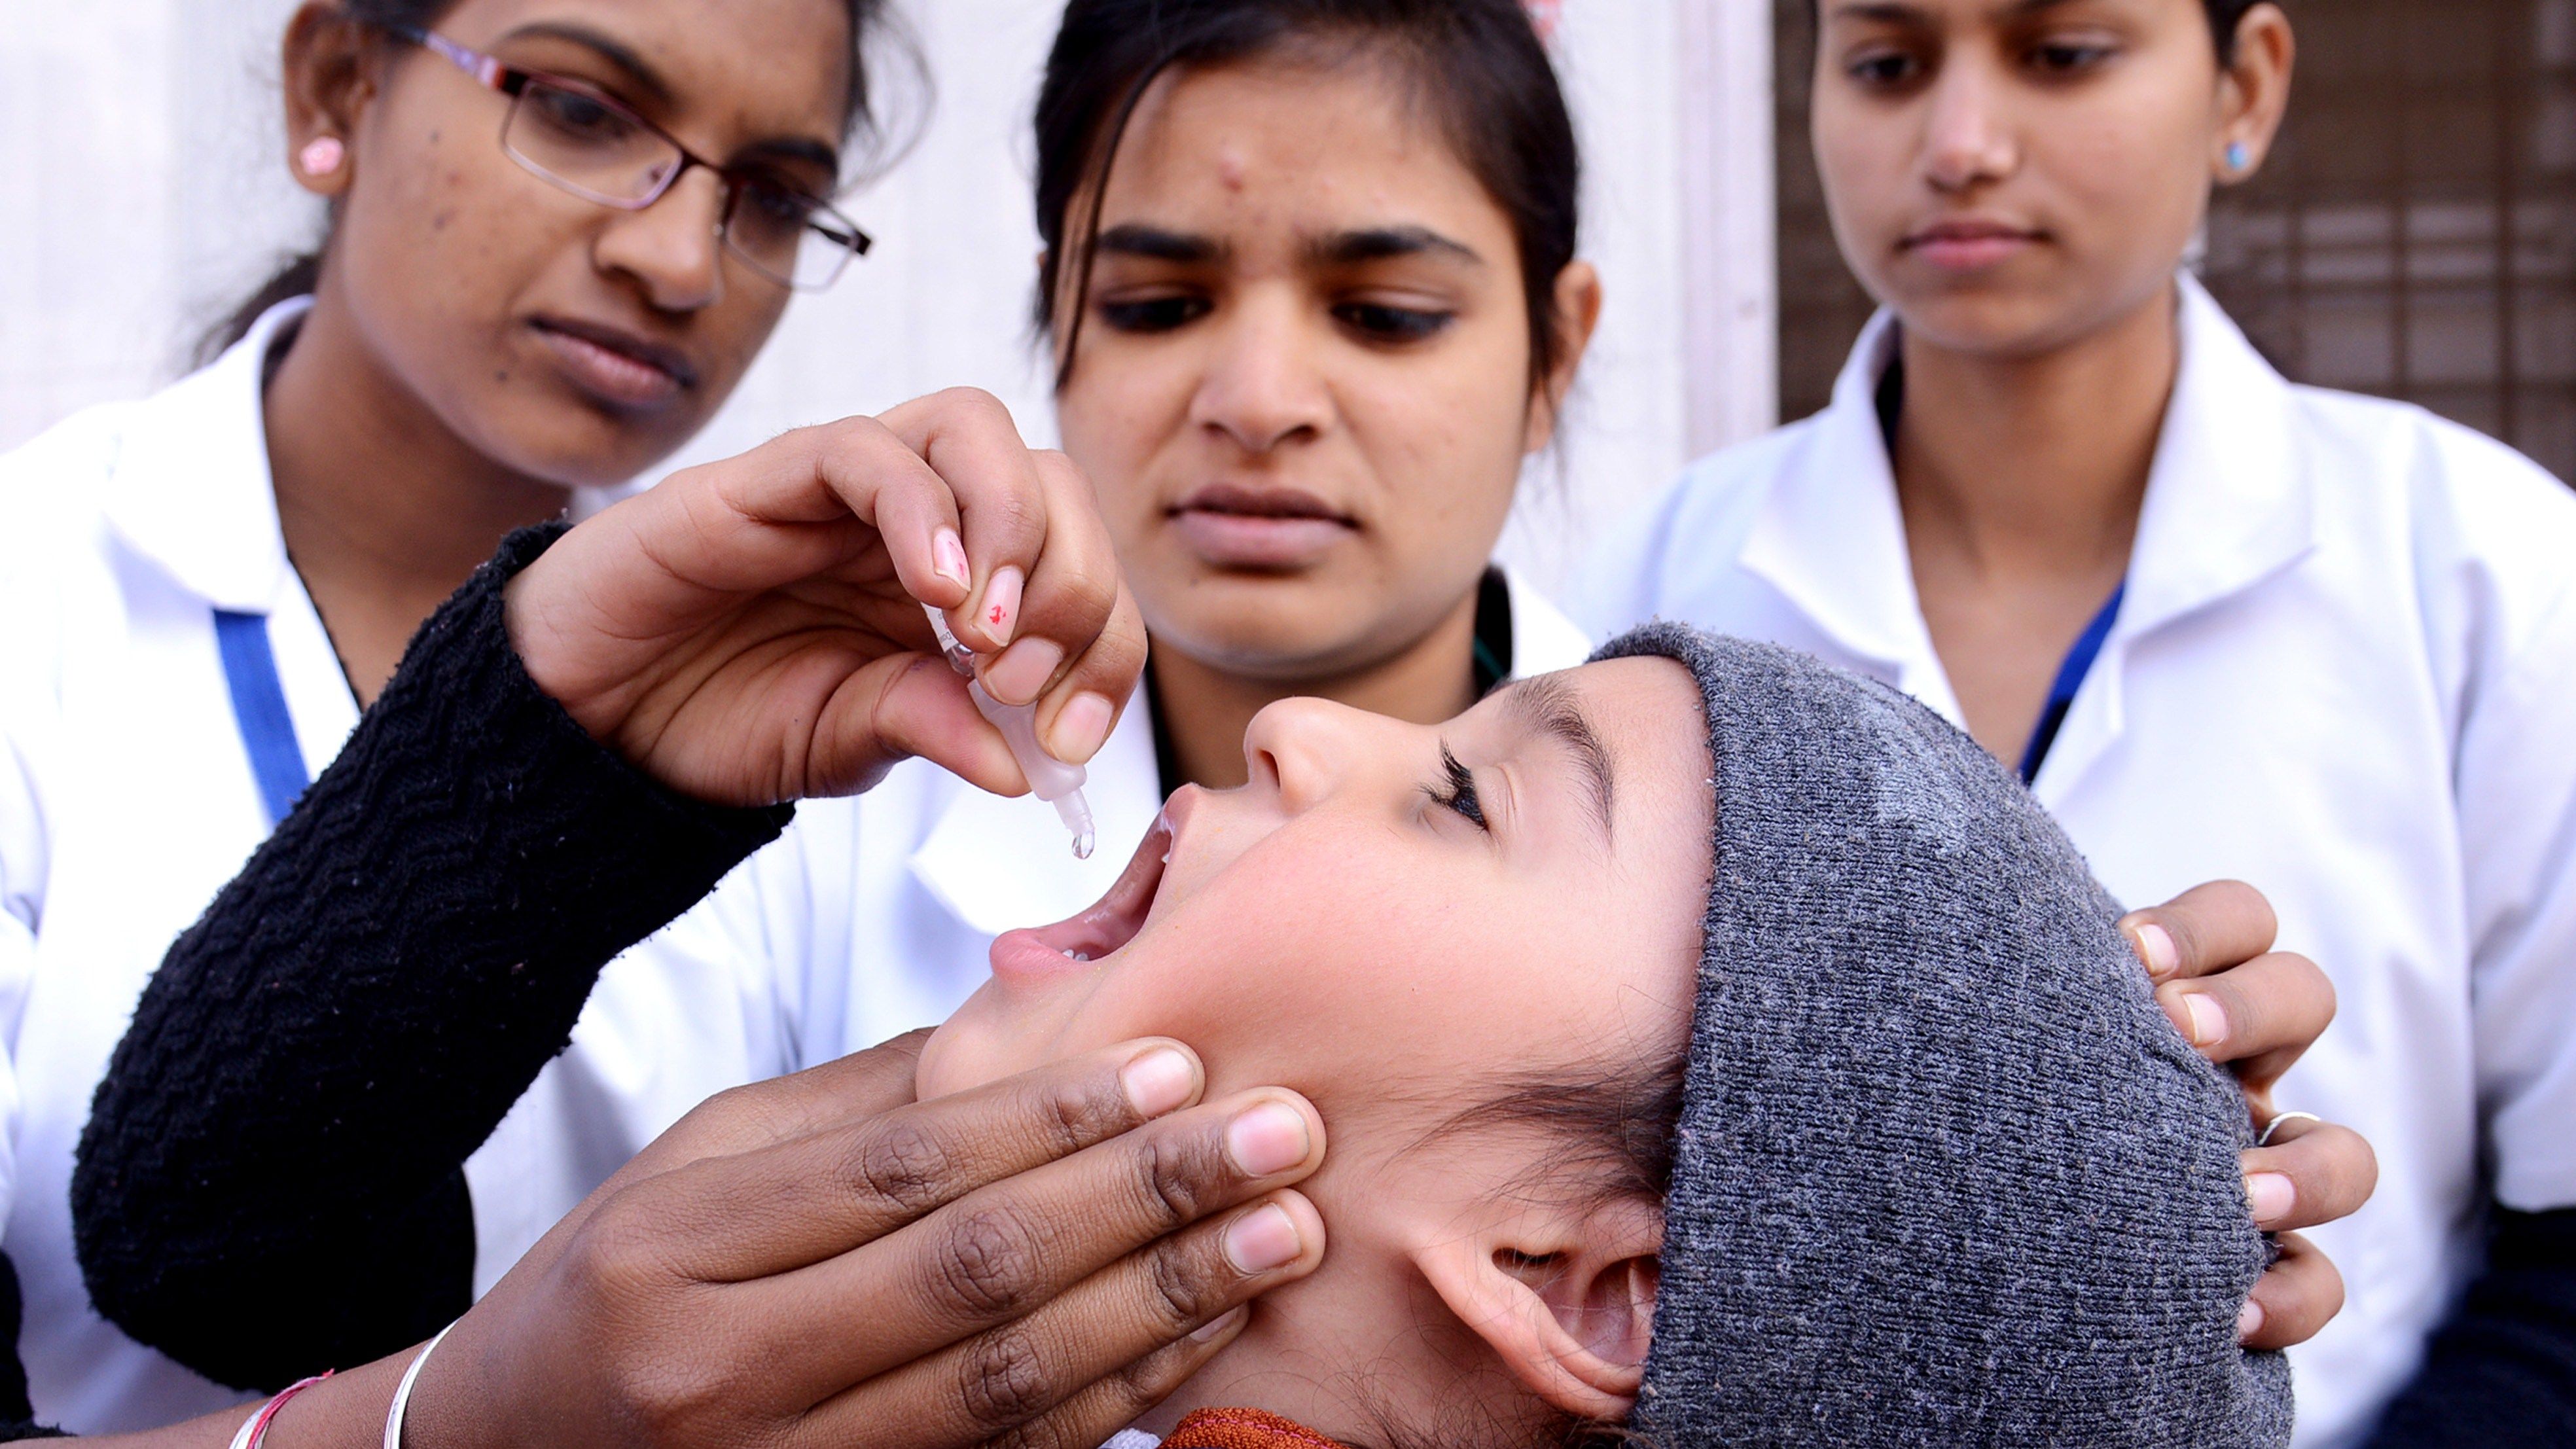 A child receives a polio vaccine from a medical volunteer in Amritsar, India.